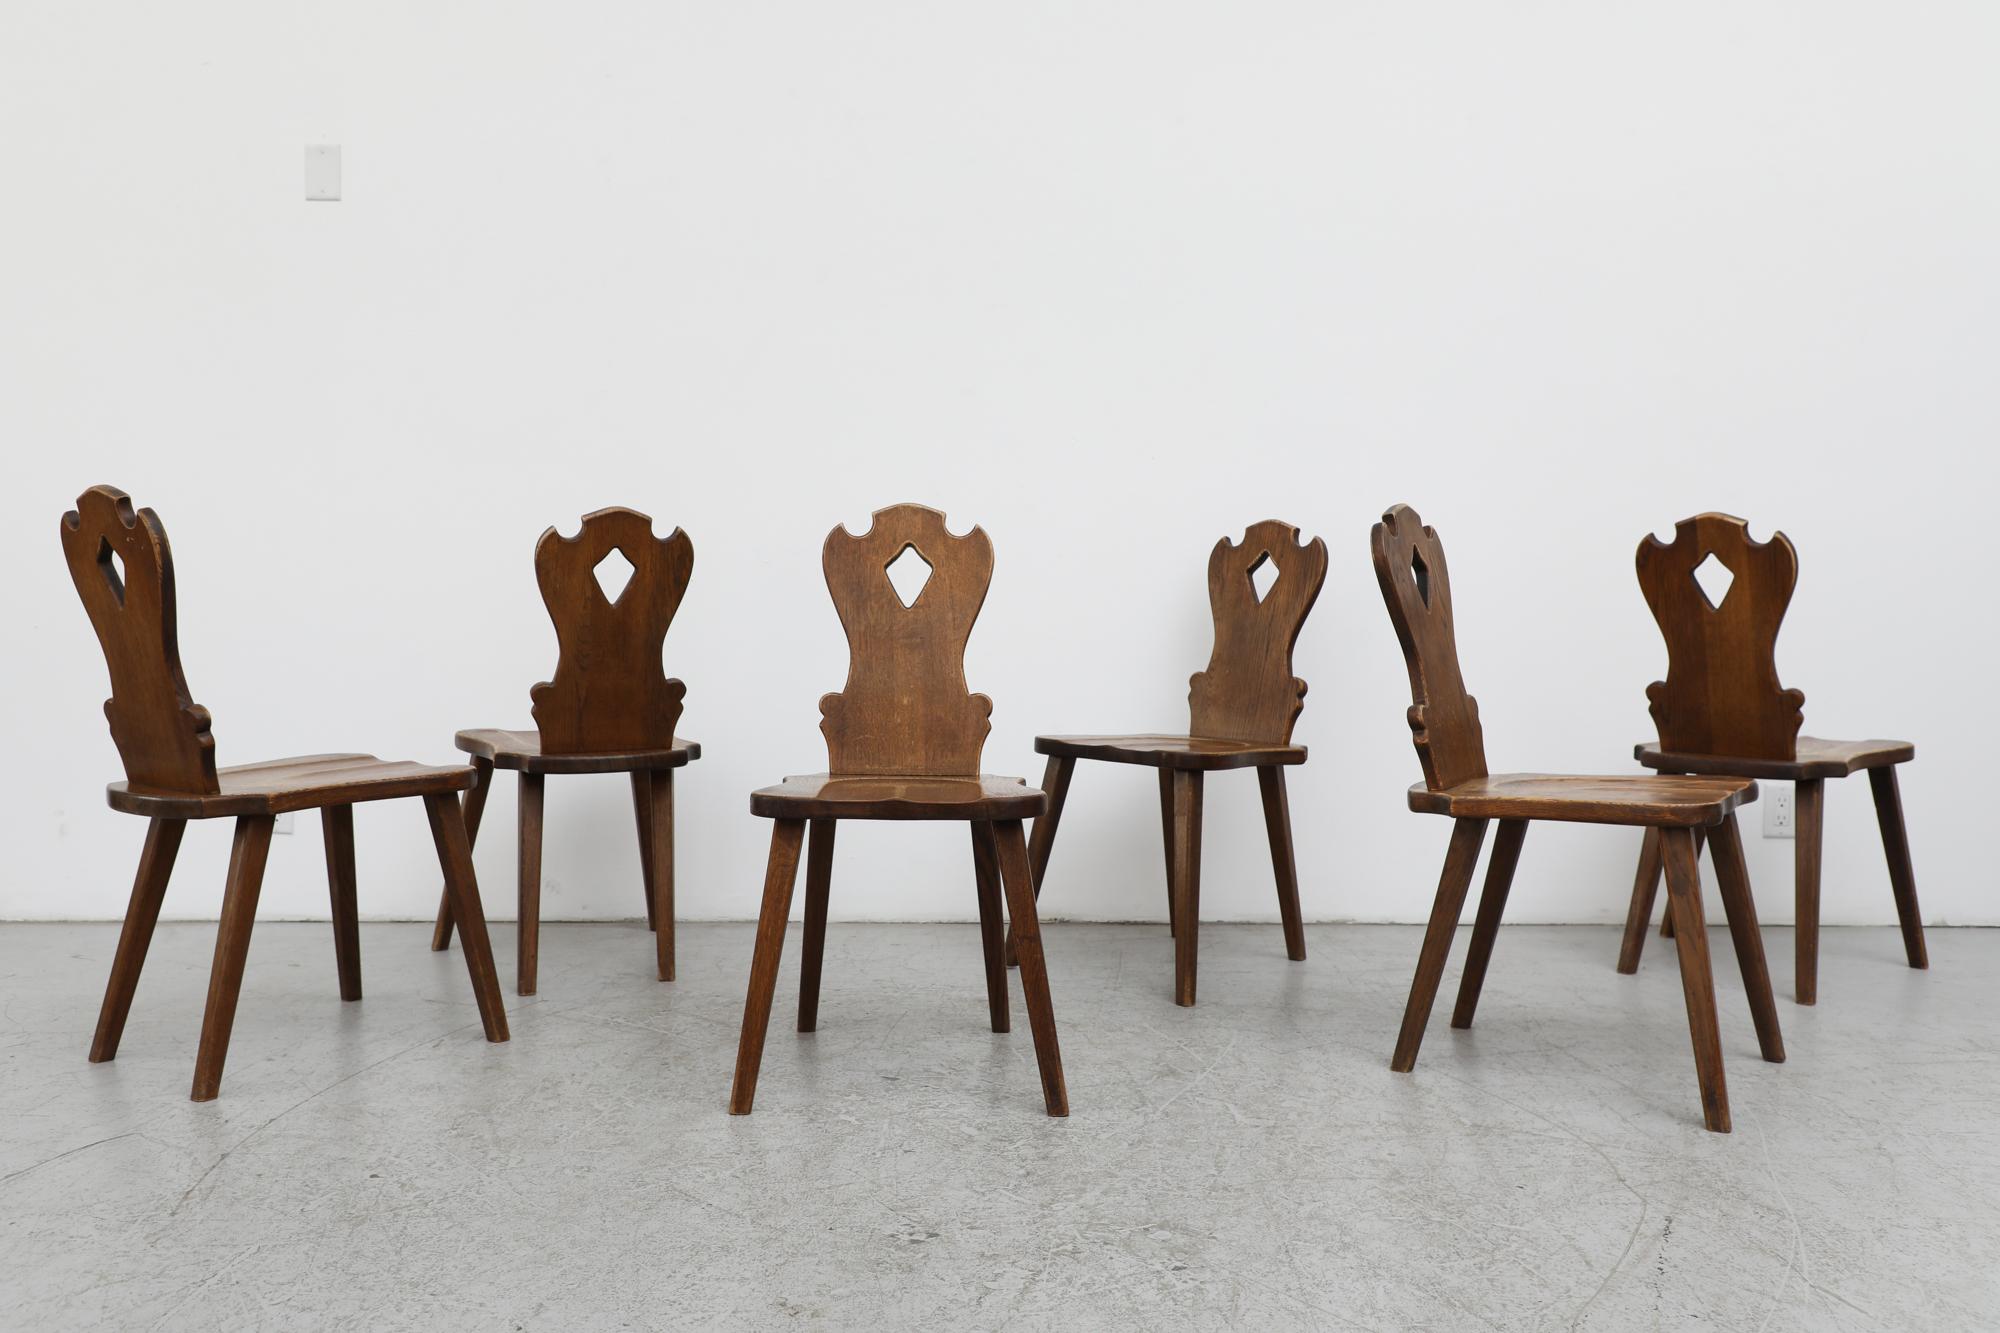 Set of 6 hand carved Brutalist solid wood dining chairs with diamond cutout. Stylistically something of a marriage between Tyrolean style ornate carving and a more sleek mid century aesthetic. In mostly original condition with some visible wear